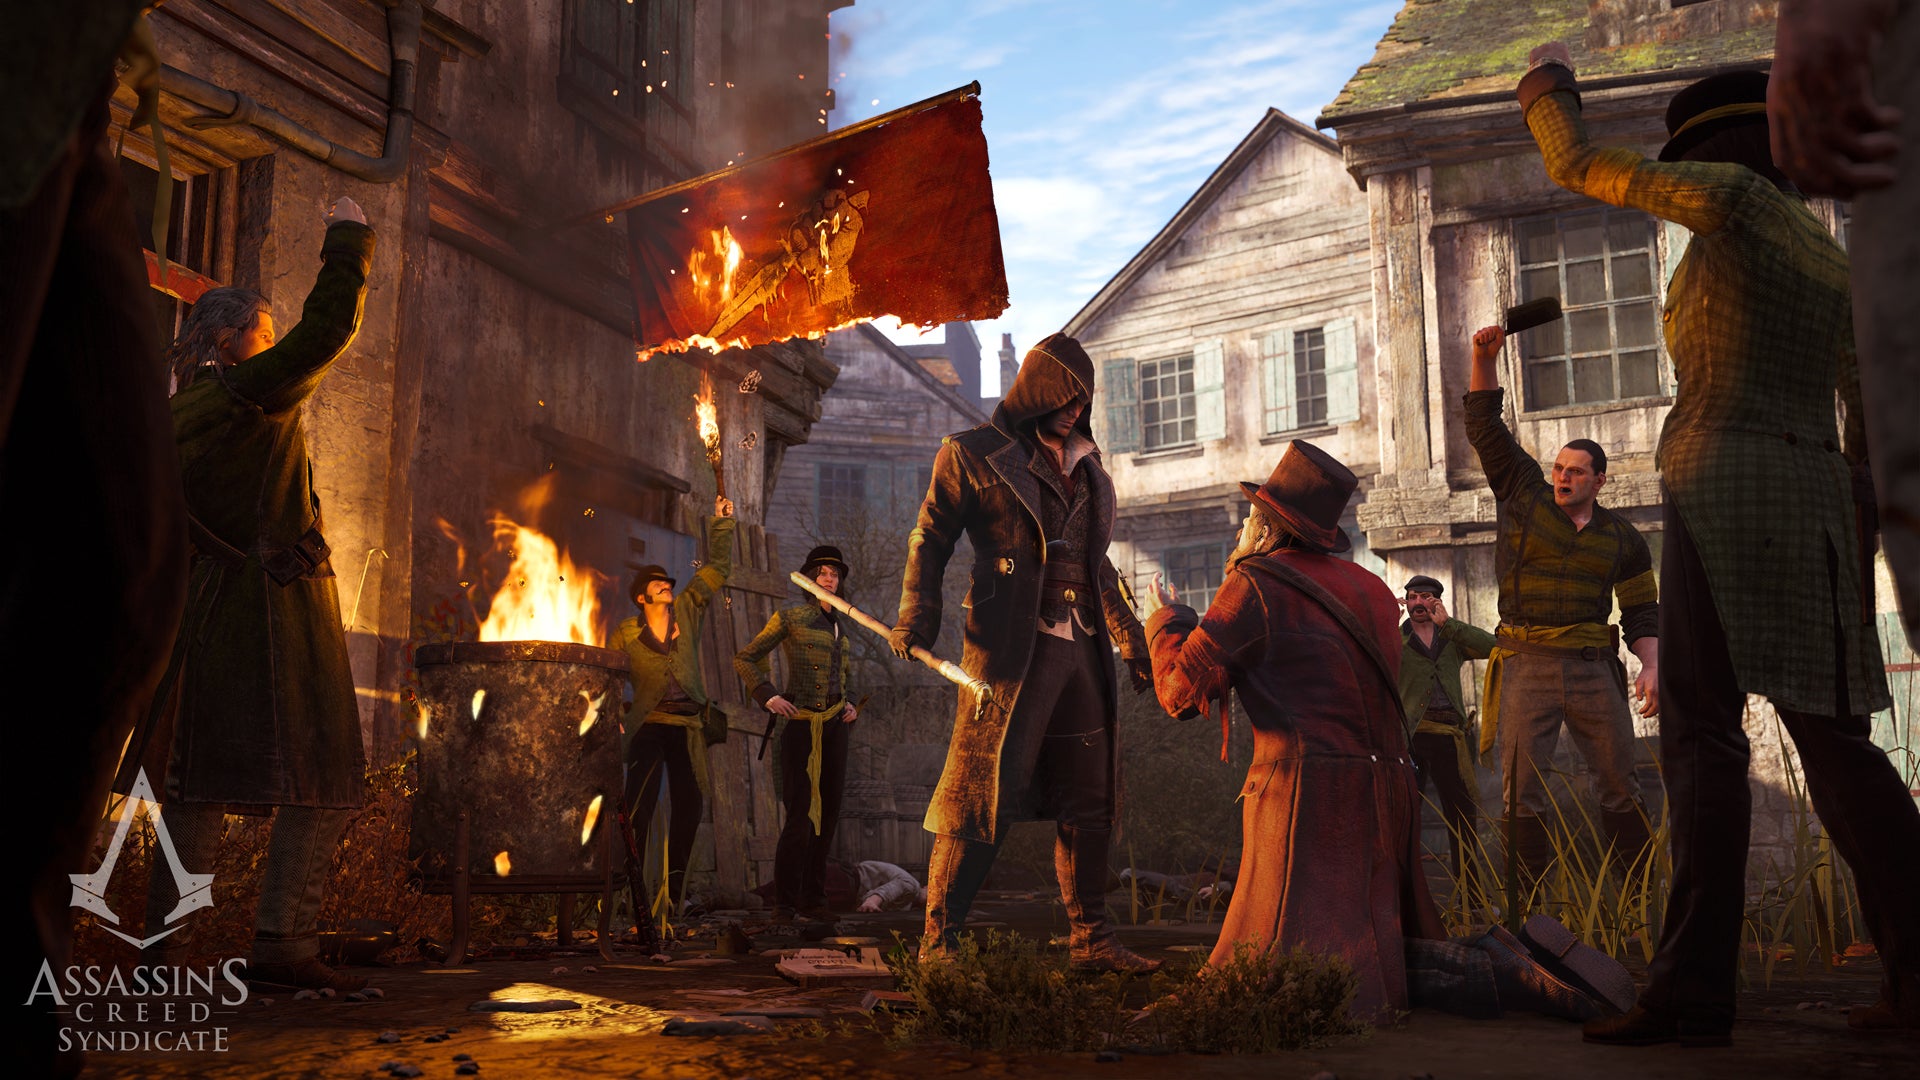 Image for Have a look at this Nvidia GameWorks video for Assassin's Creed: Syndicate